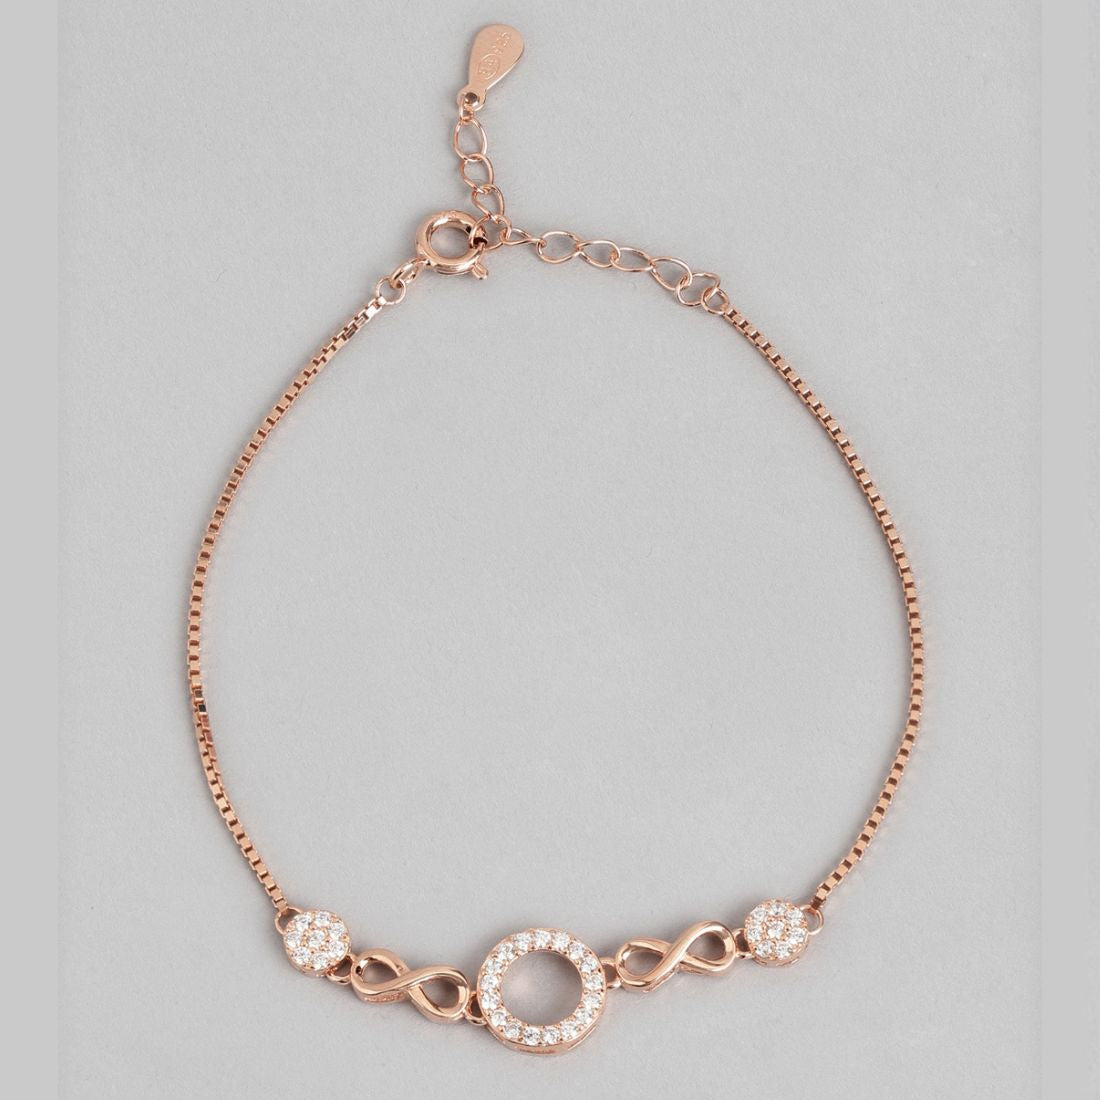 Eternal Circles Rose Gold-Plated 925 Sterling Silver Bracelet with Cubic Zirconia